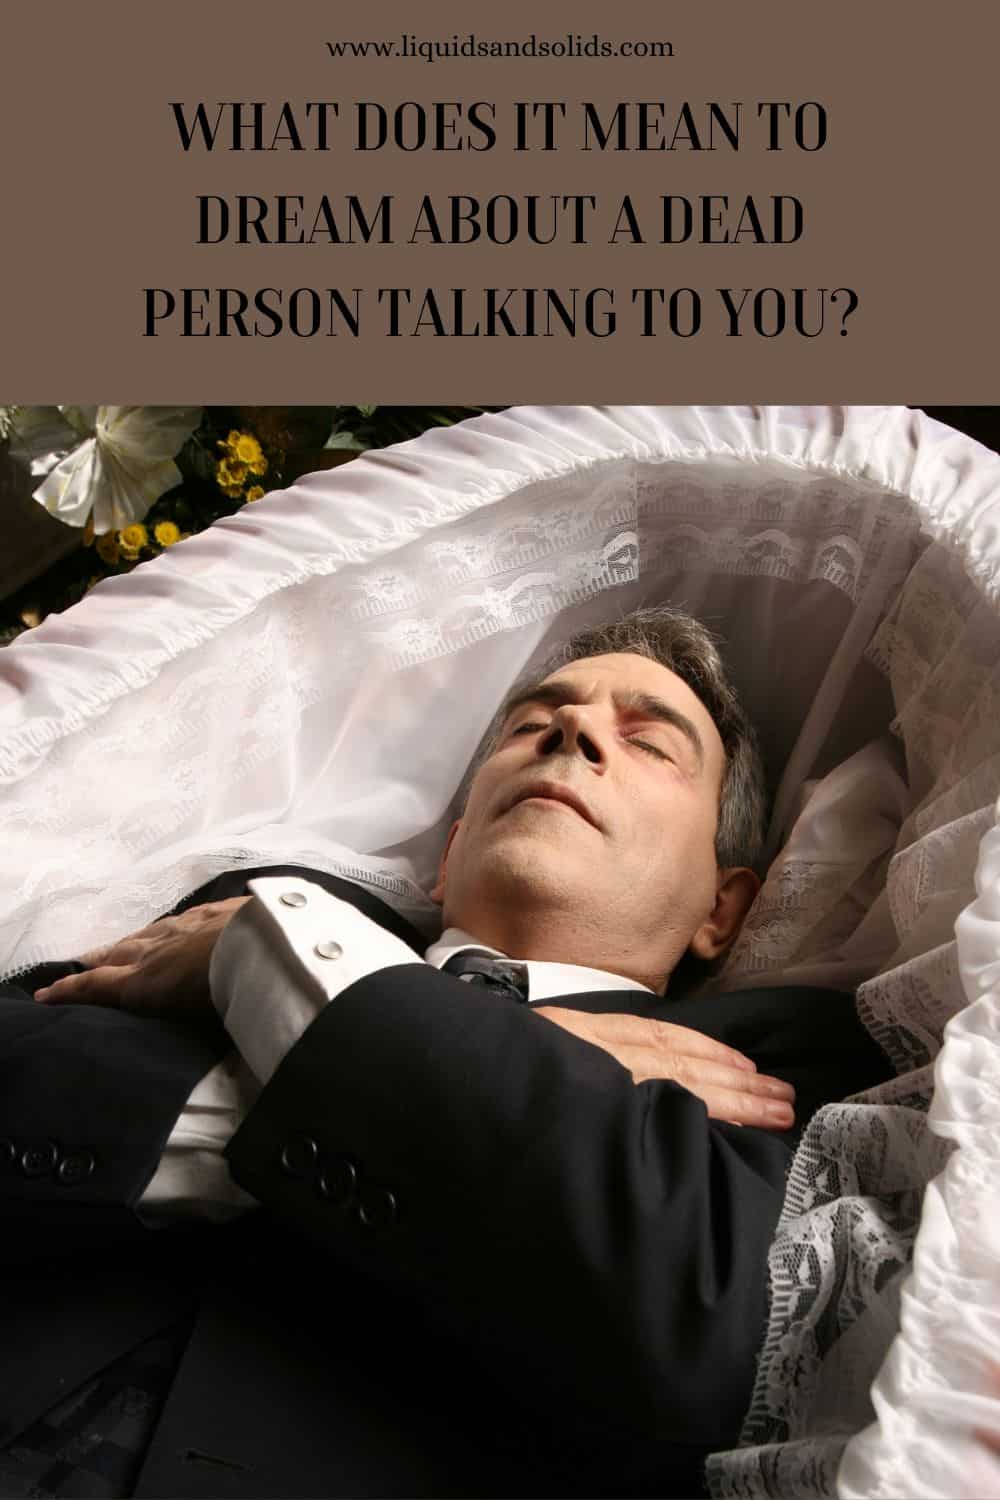 What Does It Mean To Dream About A Dead Person Talking To You?